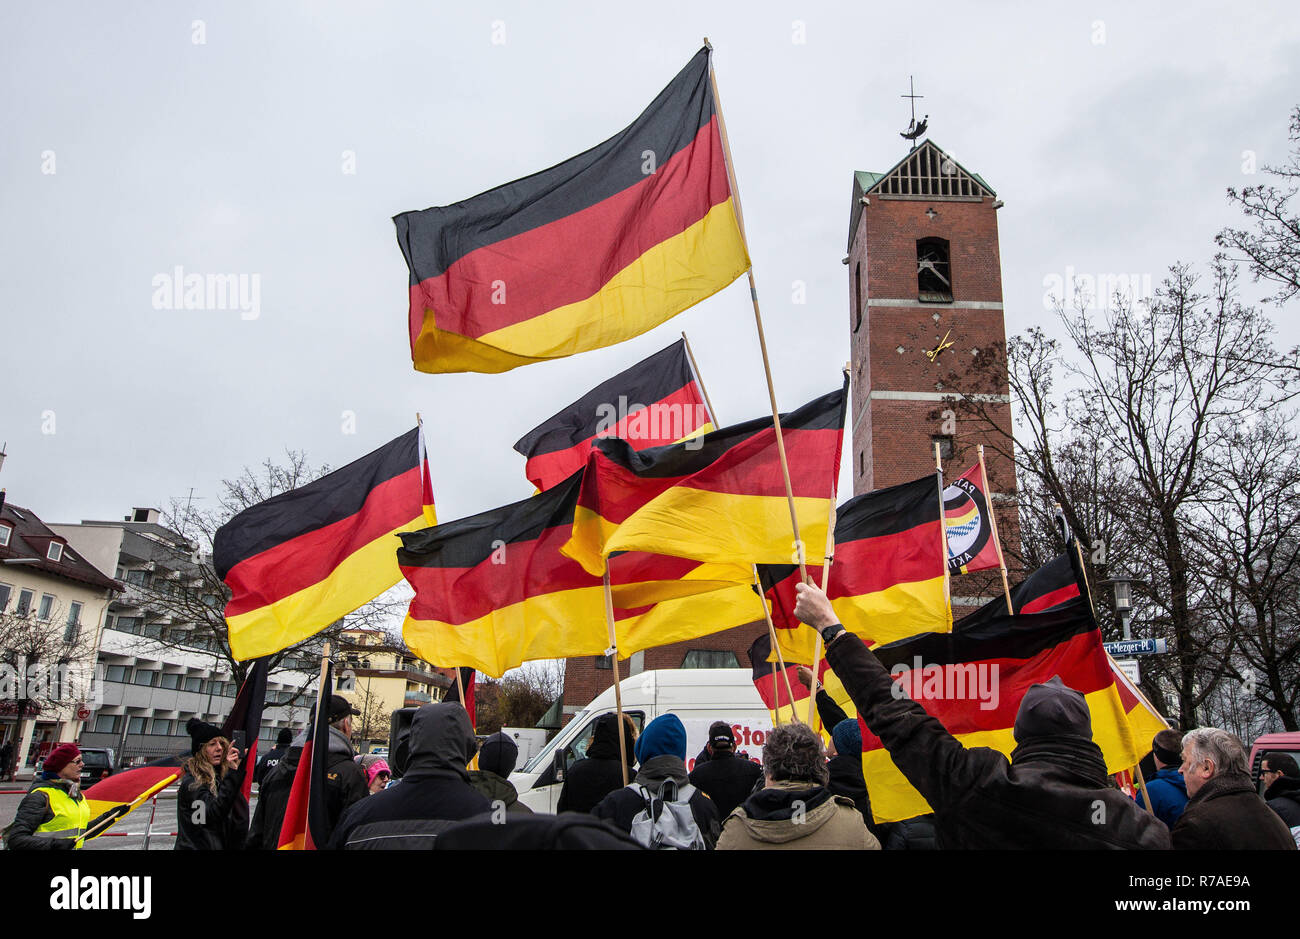 Munich, Bavaria, Germany. 8th December, 2018. Right-extremists and populists with Pegida demonstrate in front of the Dankeskirche in Munich's Milberthofen district. The Church is known for its stance against right-extremism. Pegida Dresden in Munich, the self-proclaimed original Pegida, organized a rally in the city's Milberthofen district in front of the Dankeskirche (Thanks Church) of Munich. Headed by Michael Stuerzenberger, the group rallied against the United Nations Migration Pact. Cred Credit: ZUMA Press, Inc./Alamy Live News Stock Photo